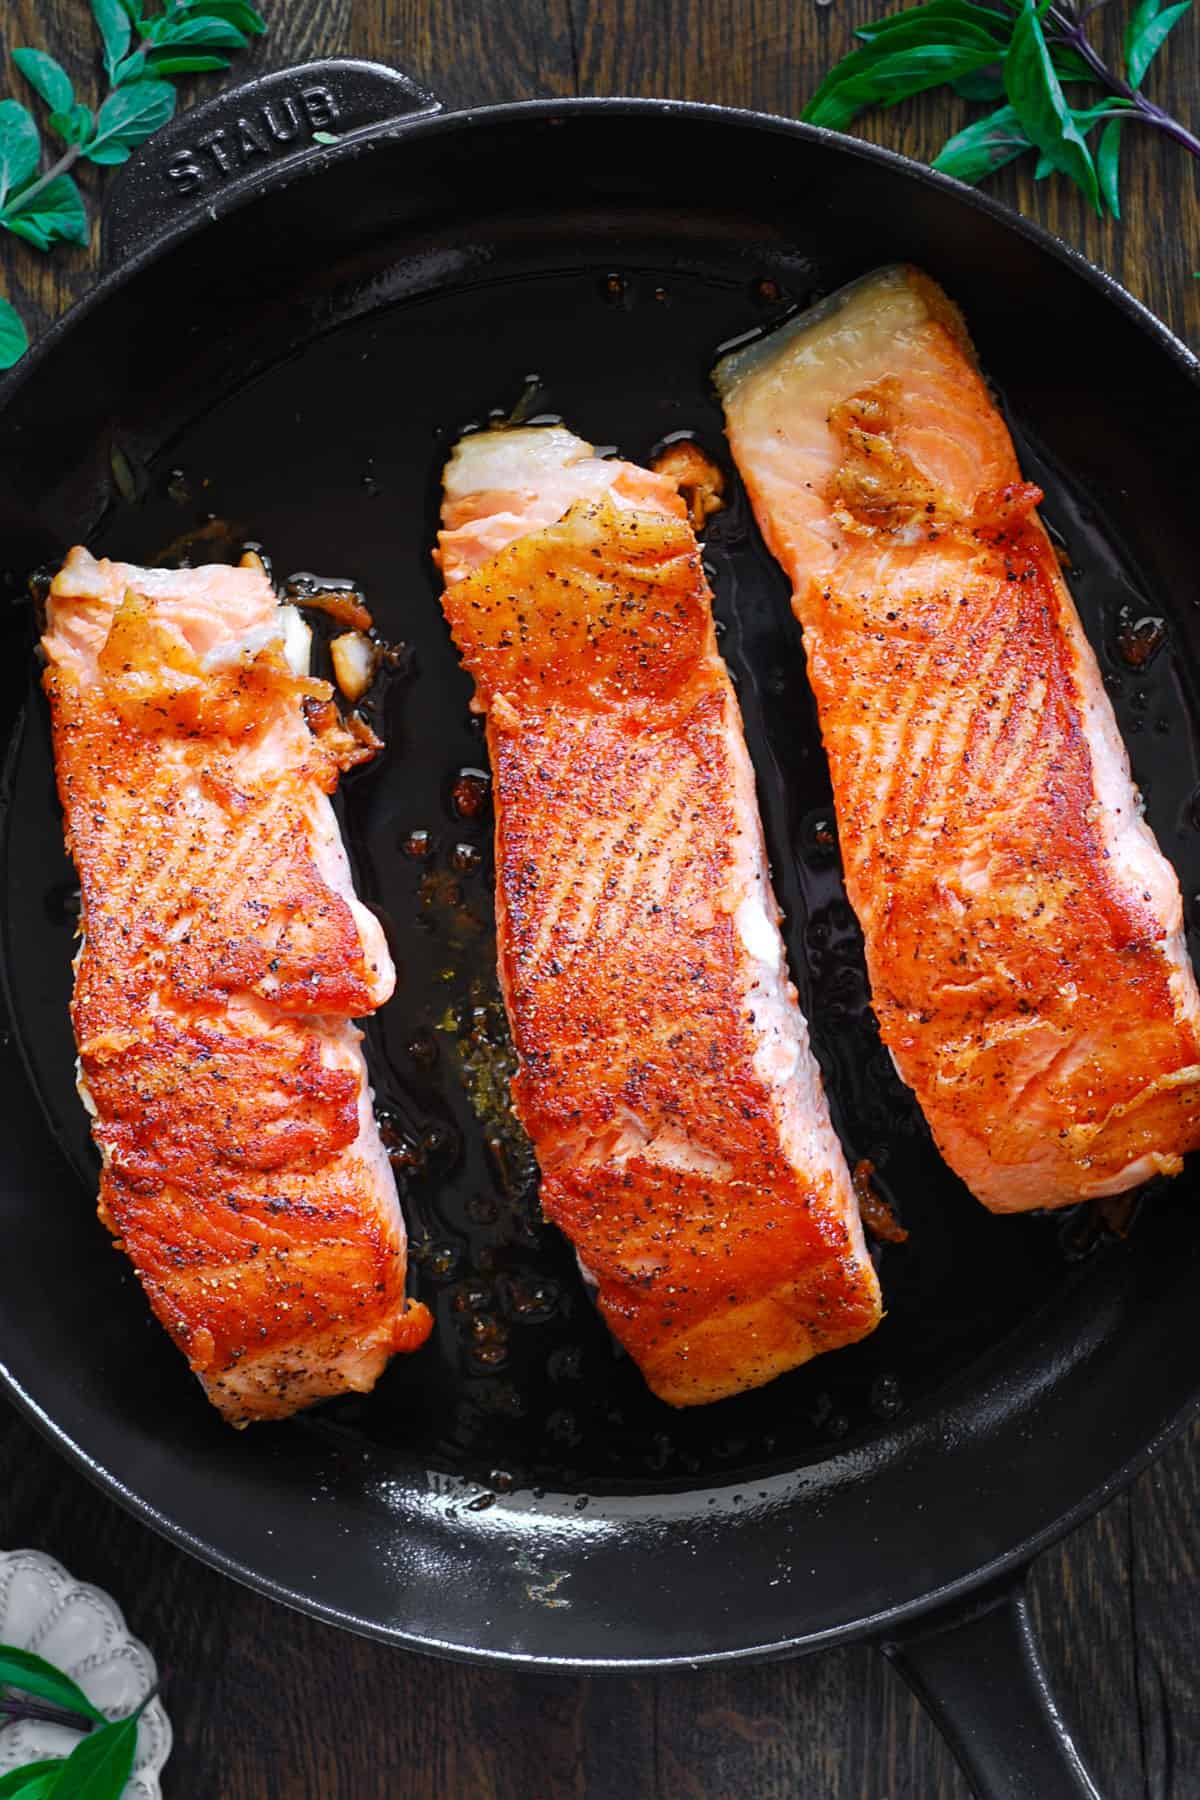 3 pan-seared salmon fillets - in a cast iron skillet.